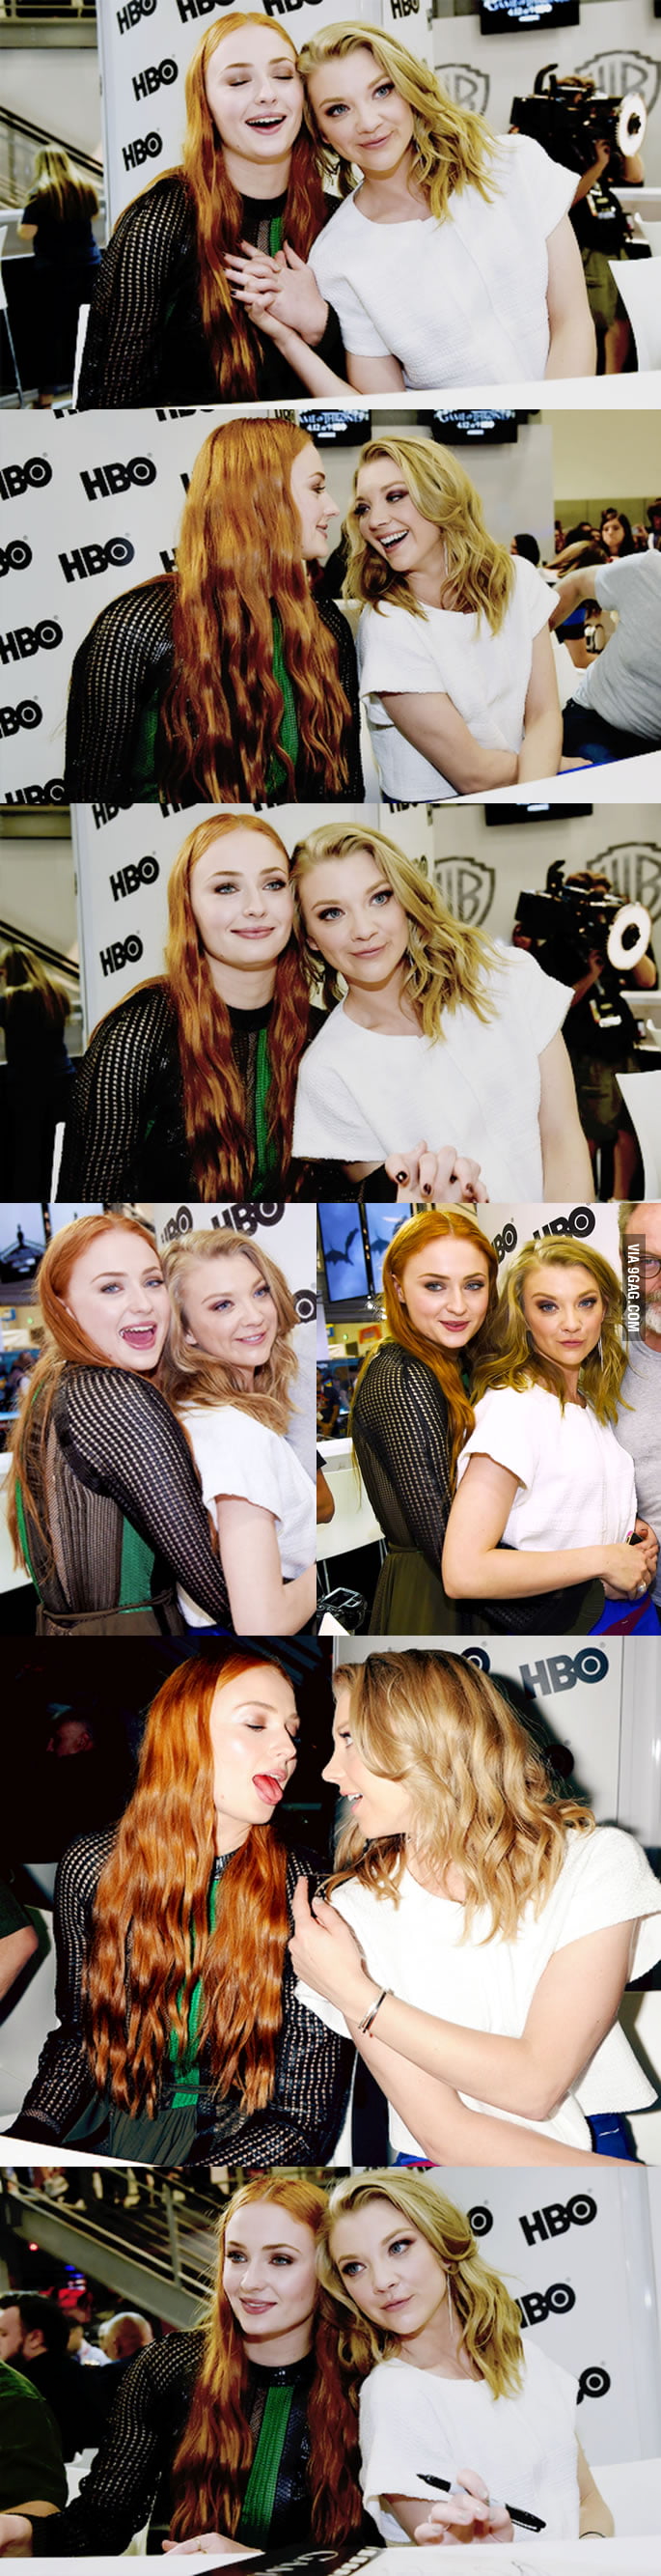 Sophie Turner is actually the embodiment of the internet when it comes to Natalie Dormer